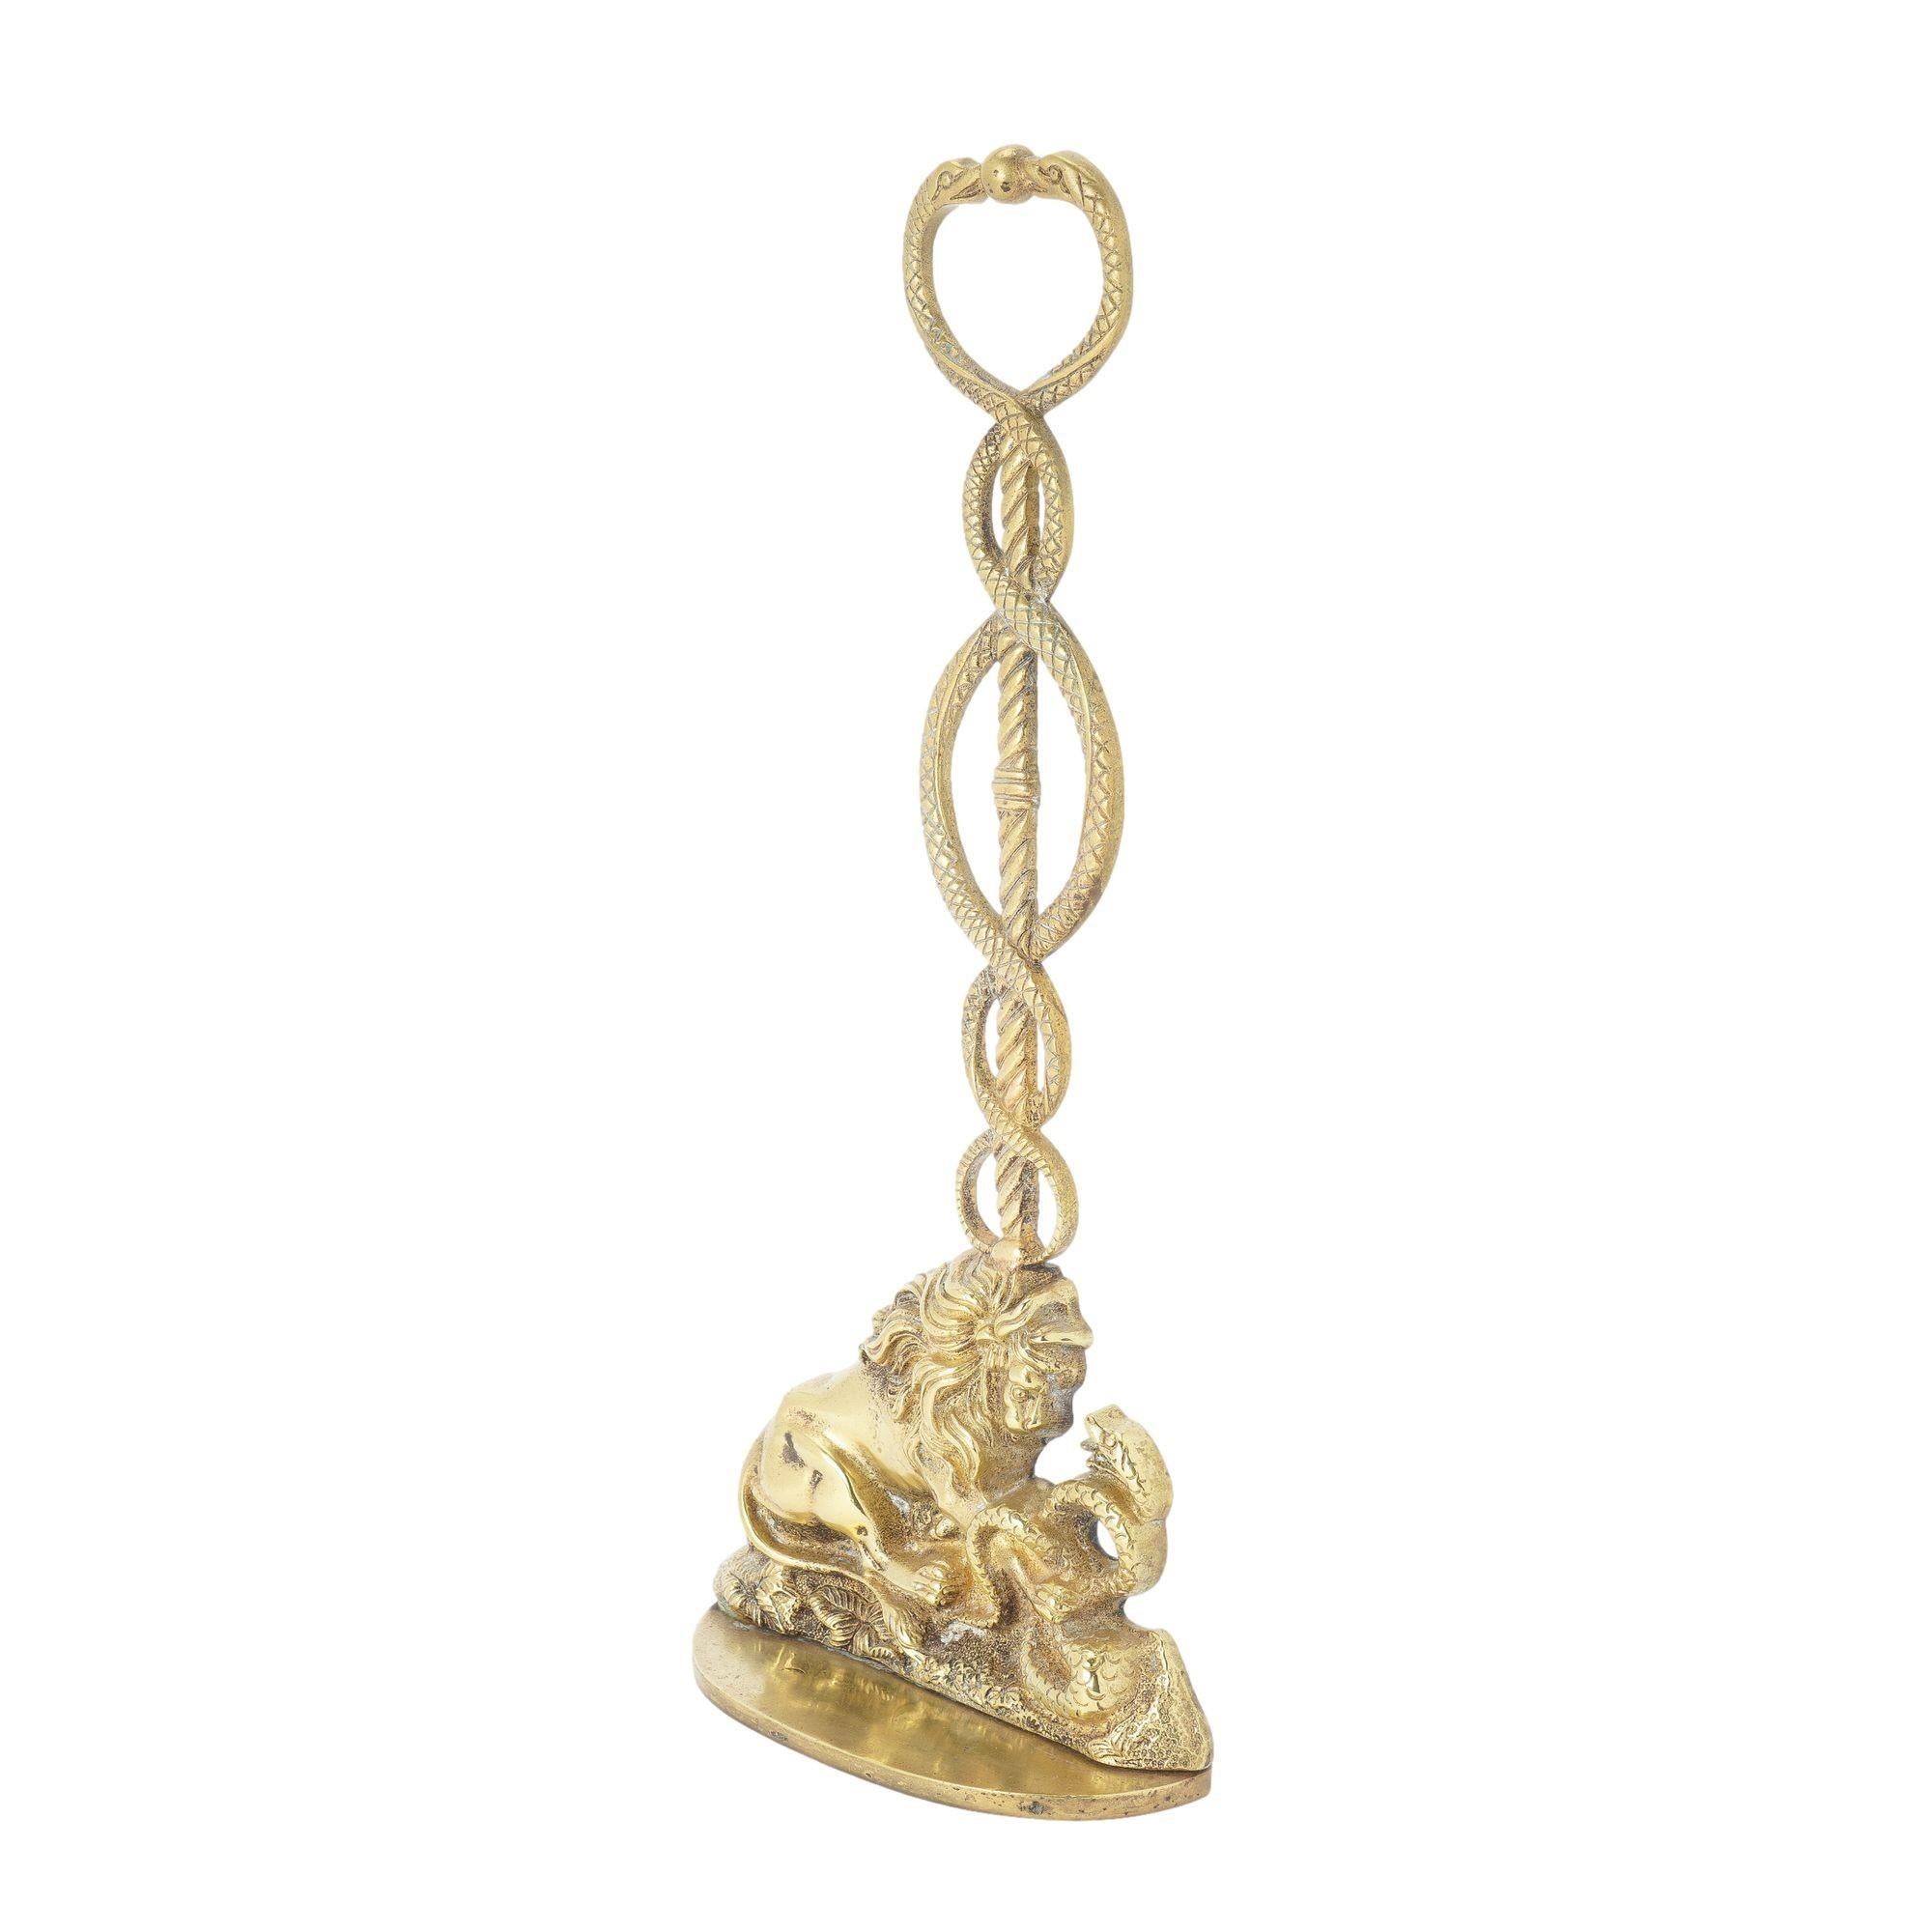 Cast brass and lead weighted door stop of a lion confronting a snake, centered on a caduceus with the two snake heads forming a loop handle. The casting is in fine original condition with excellent detail.

English, Regency period, circa 1820.